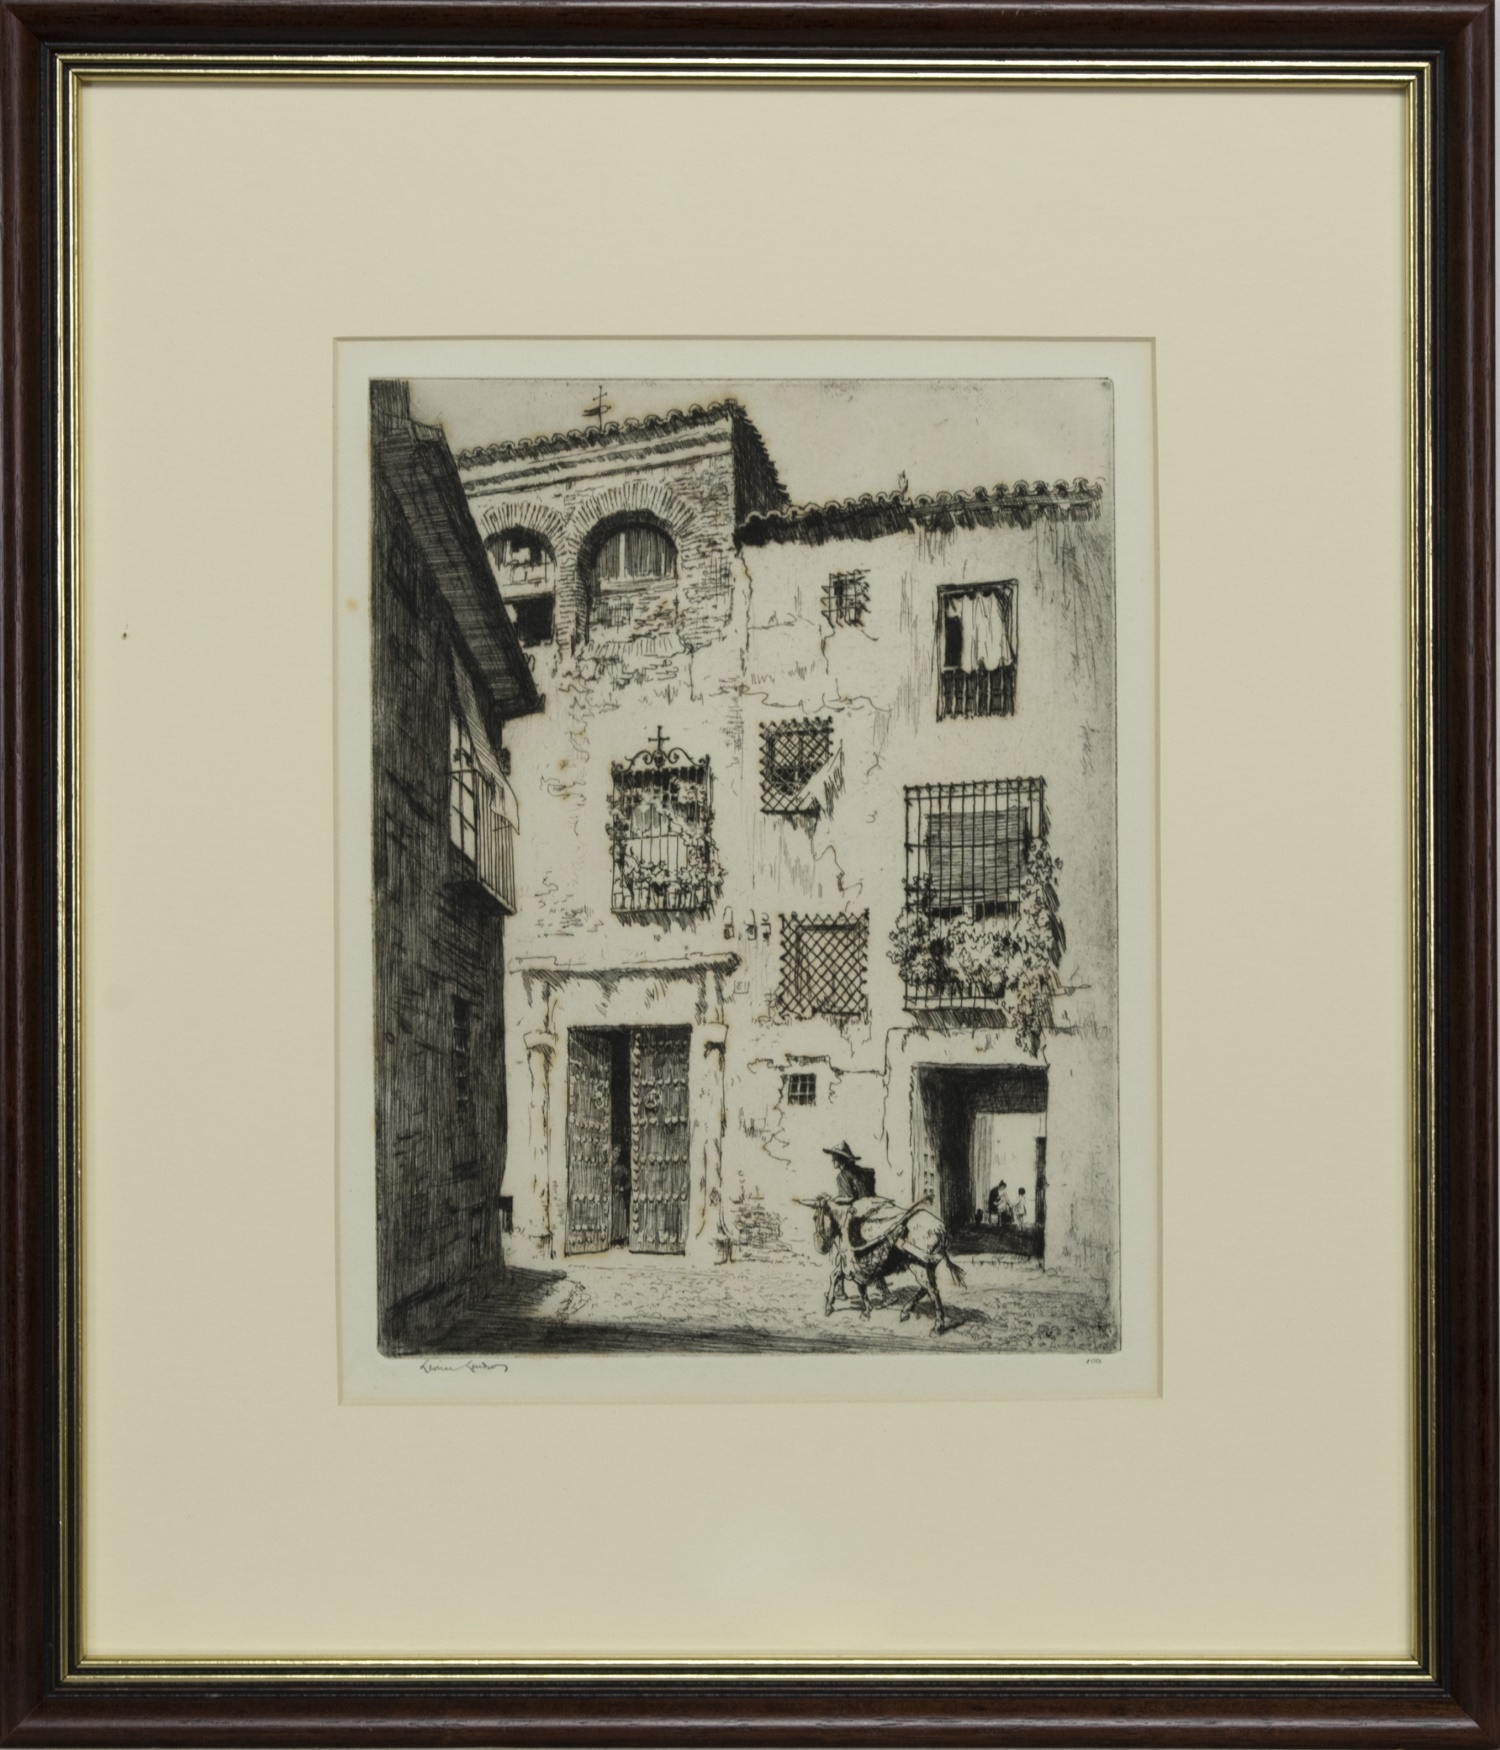 DONKEY IN STREET, AN ETCHING